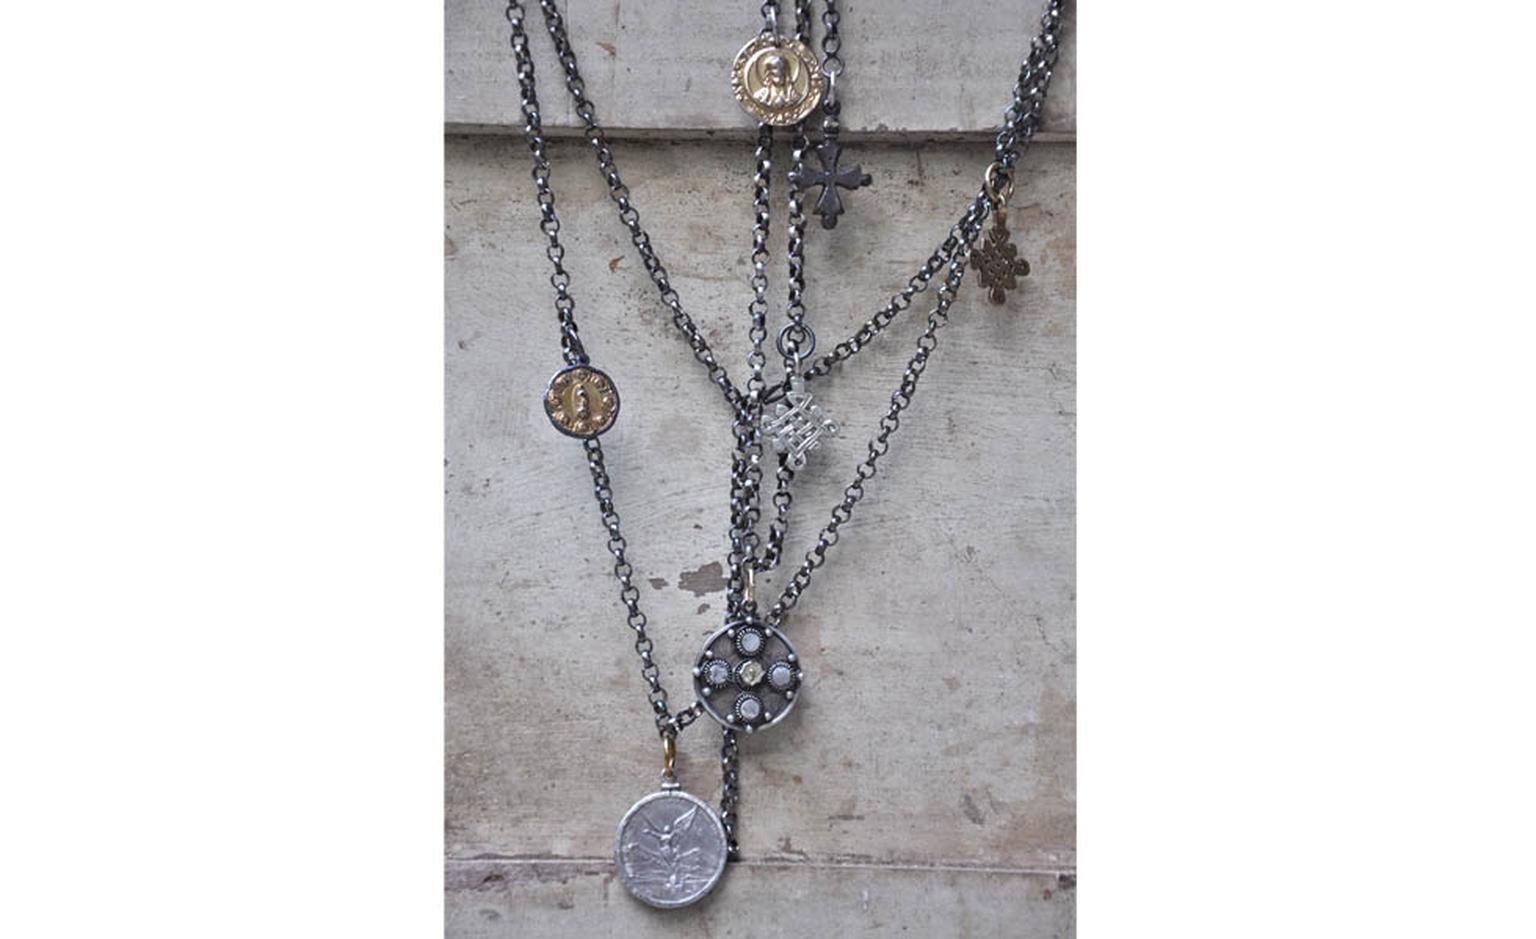 Carolyn Roumeguere Mexican Pirate necklace with Mexican medallions and Ethiopian silver circles in skulls in gold and silver £4,125